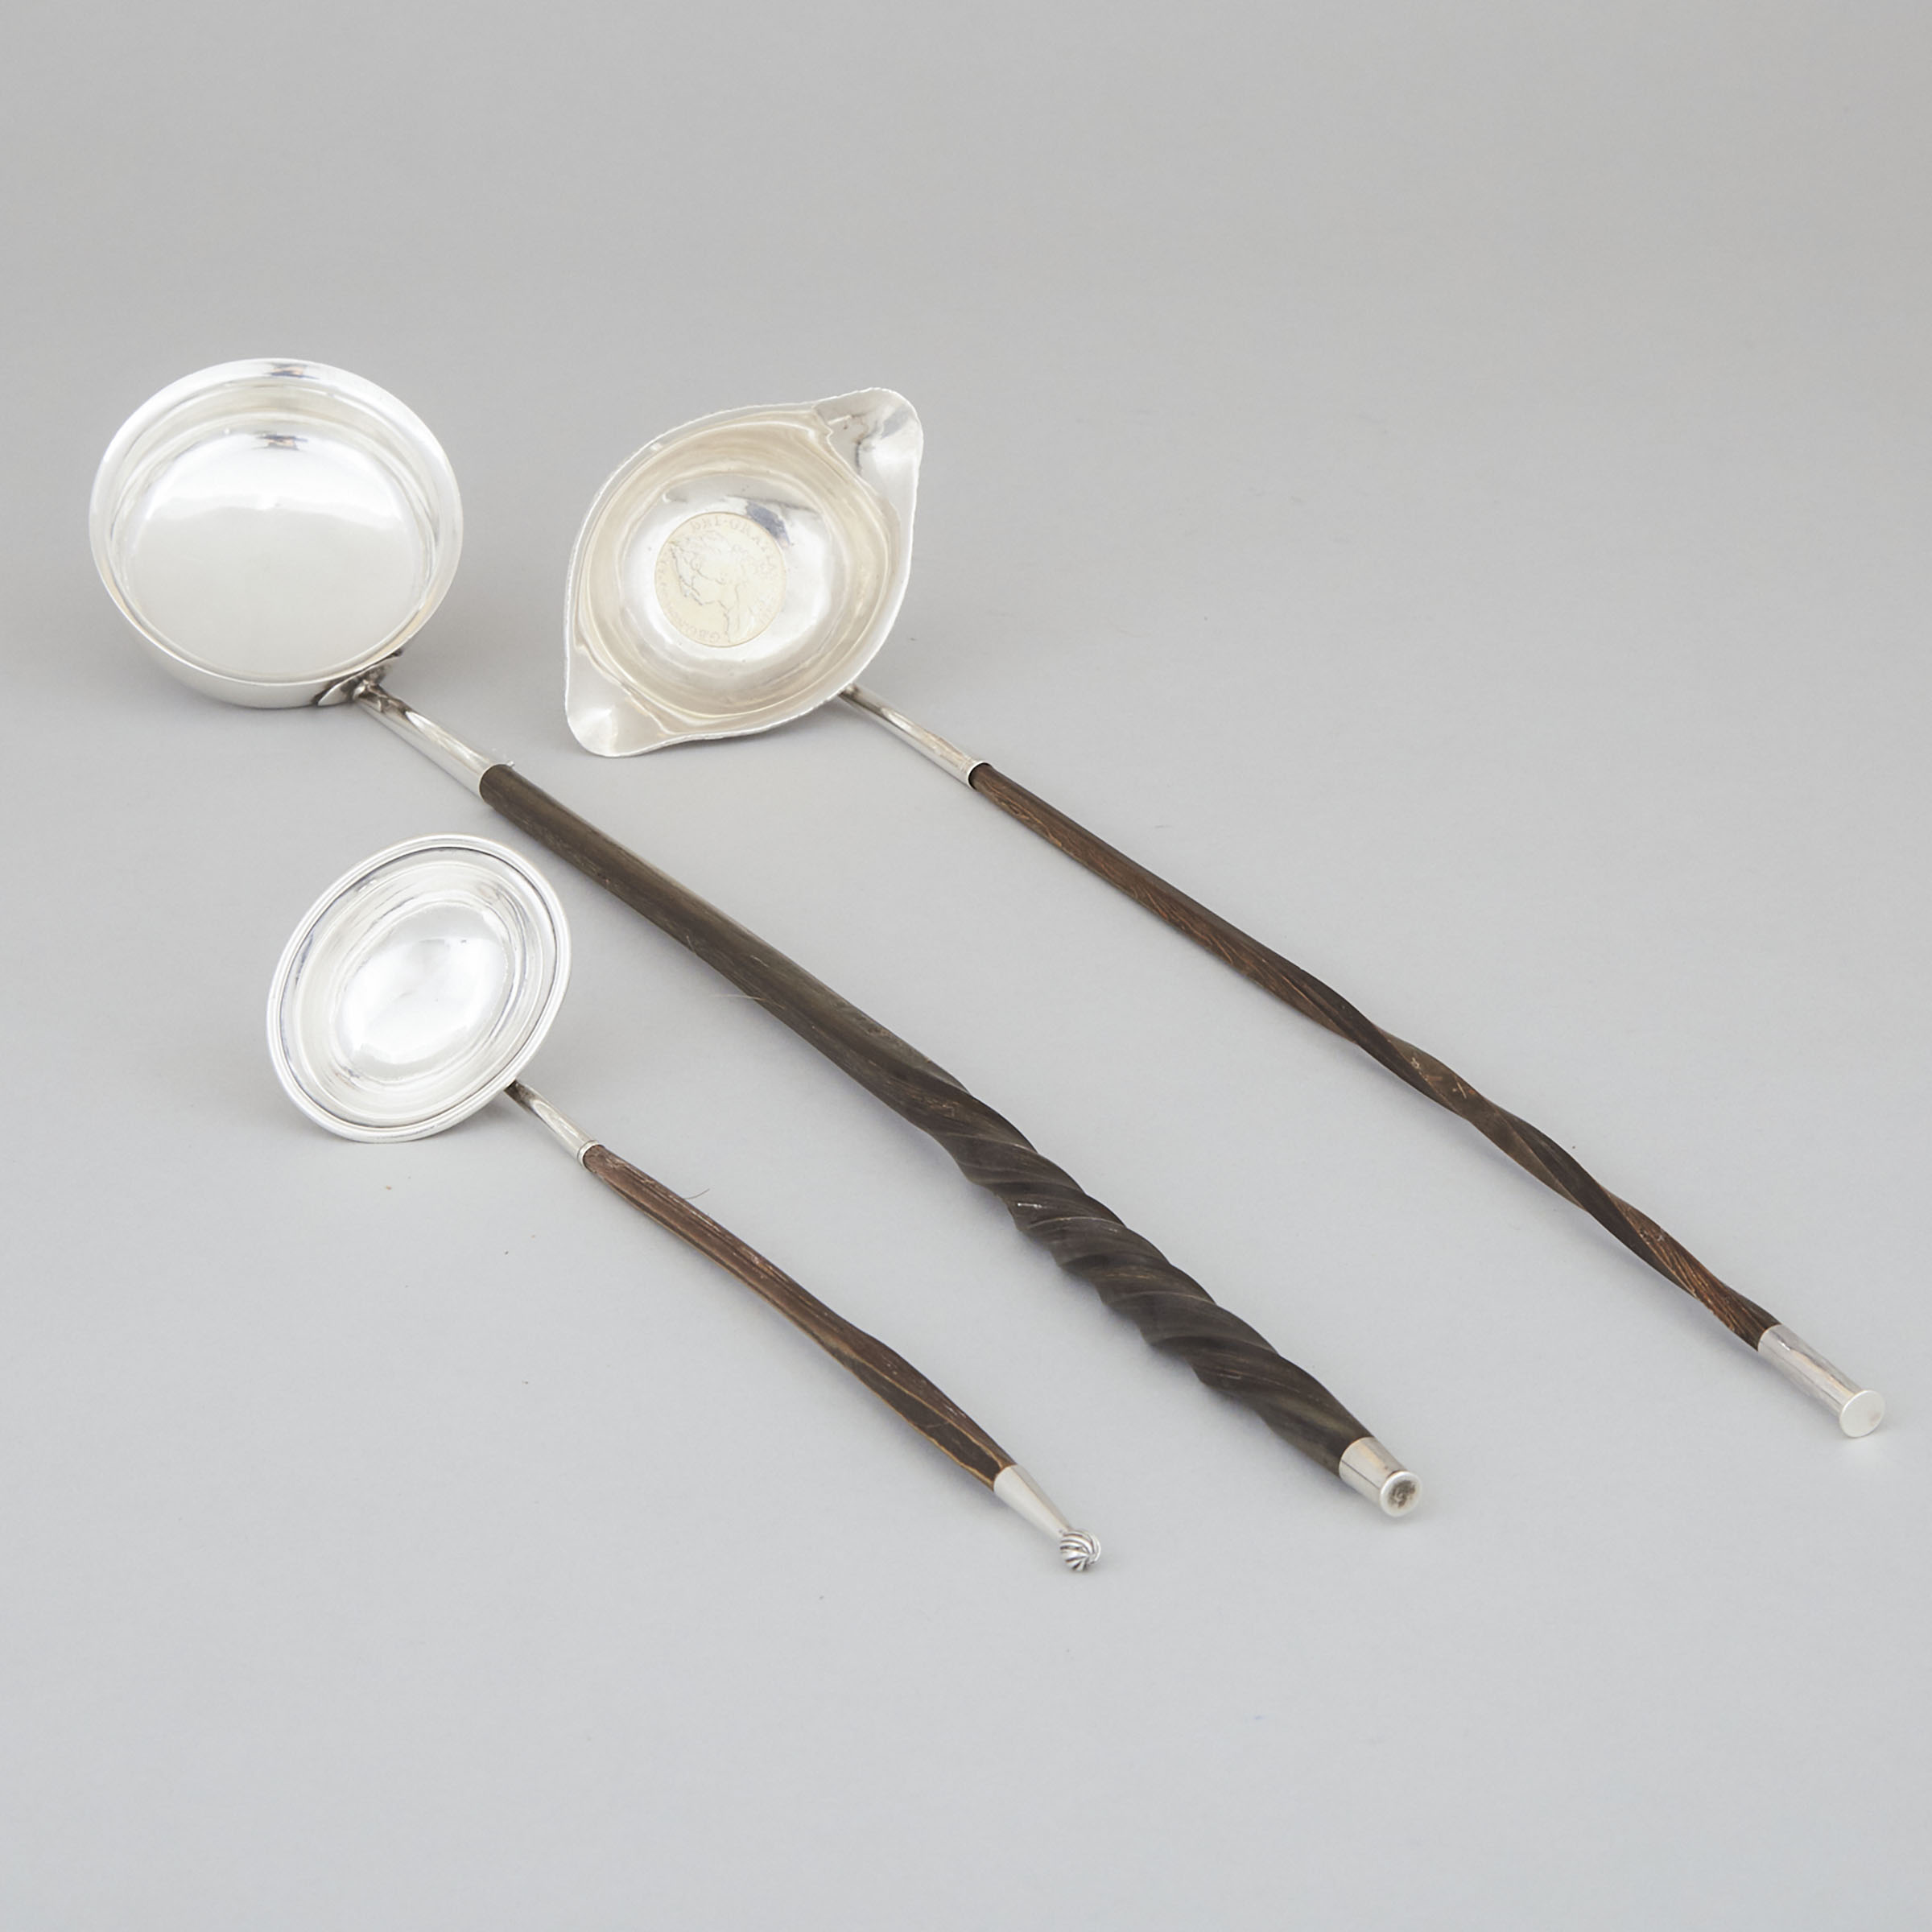 Two George III Silver Toddy Ladles and a Cream Ladle, c.1800